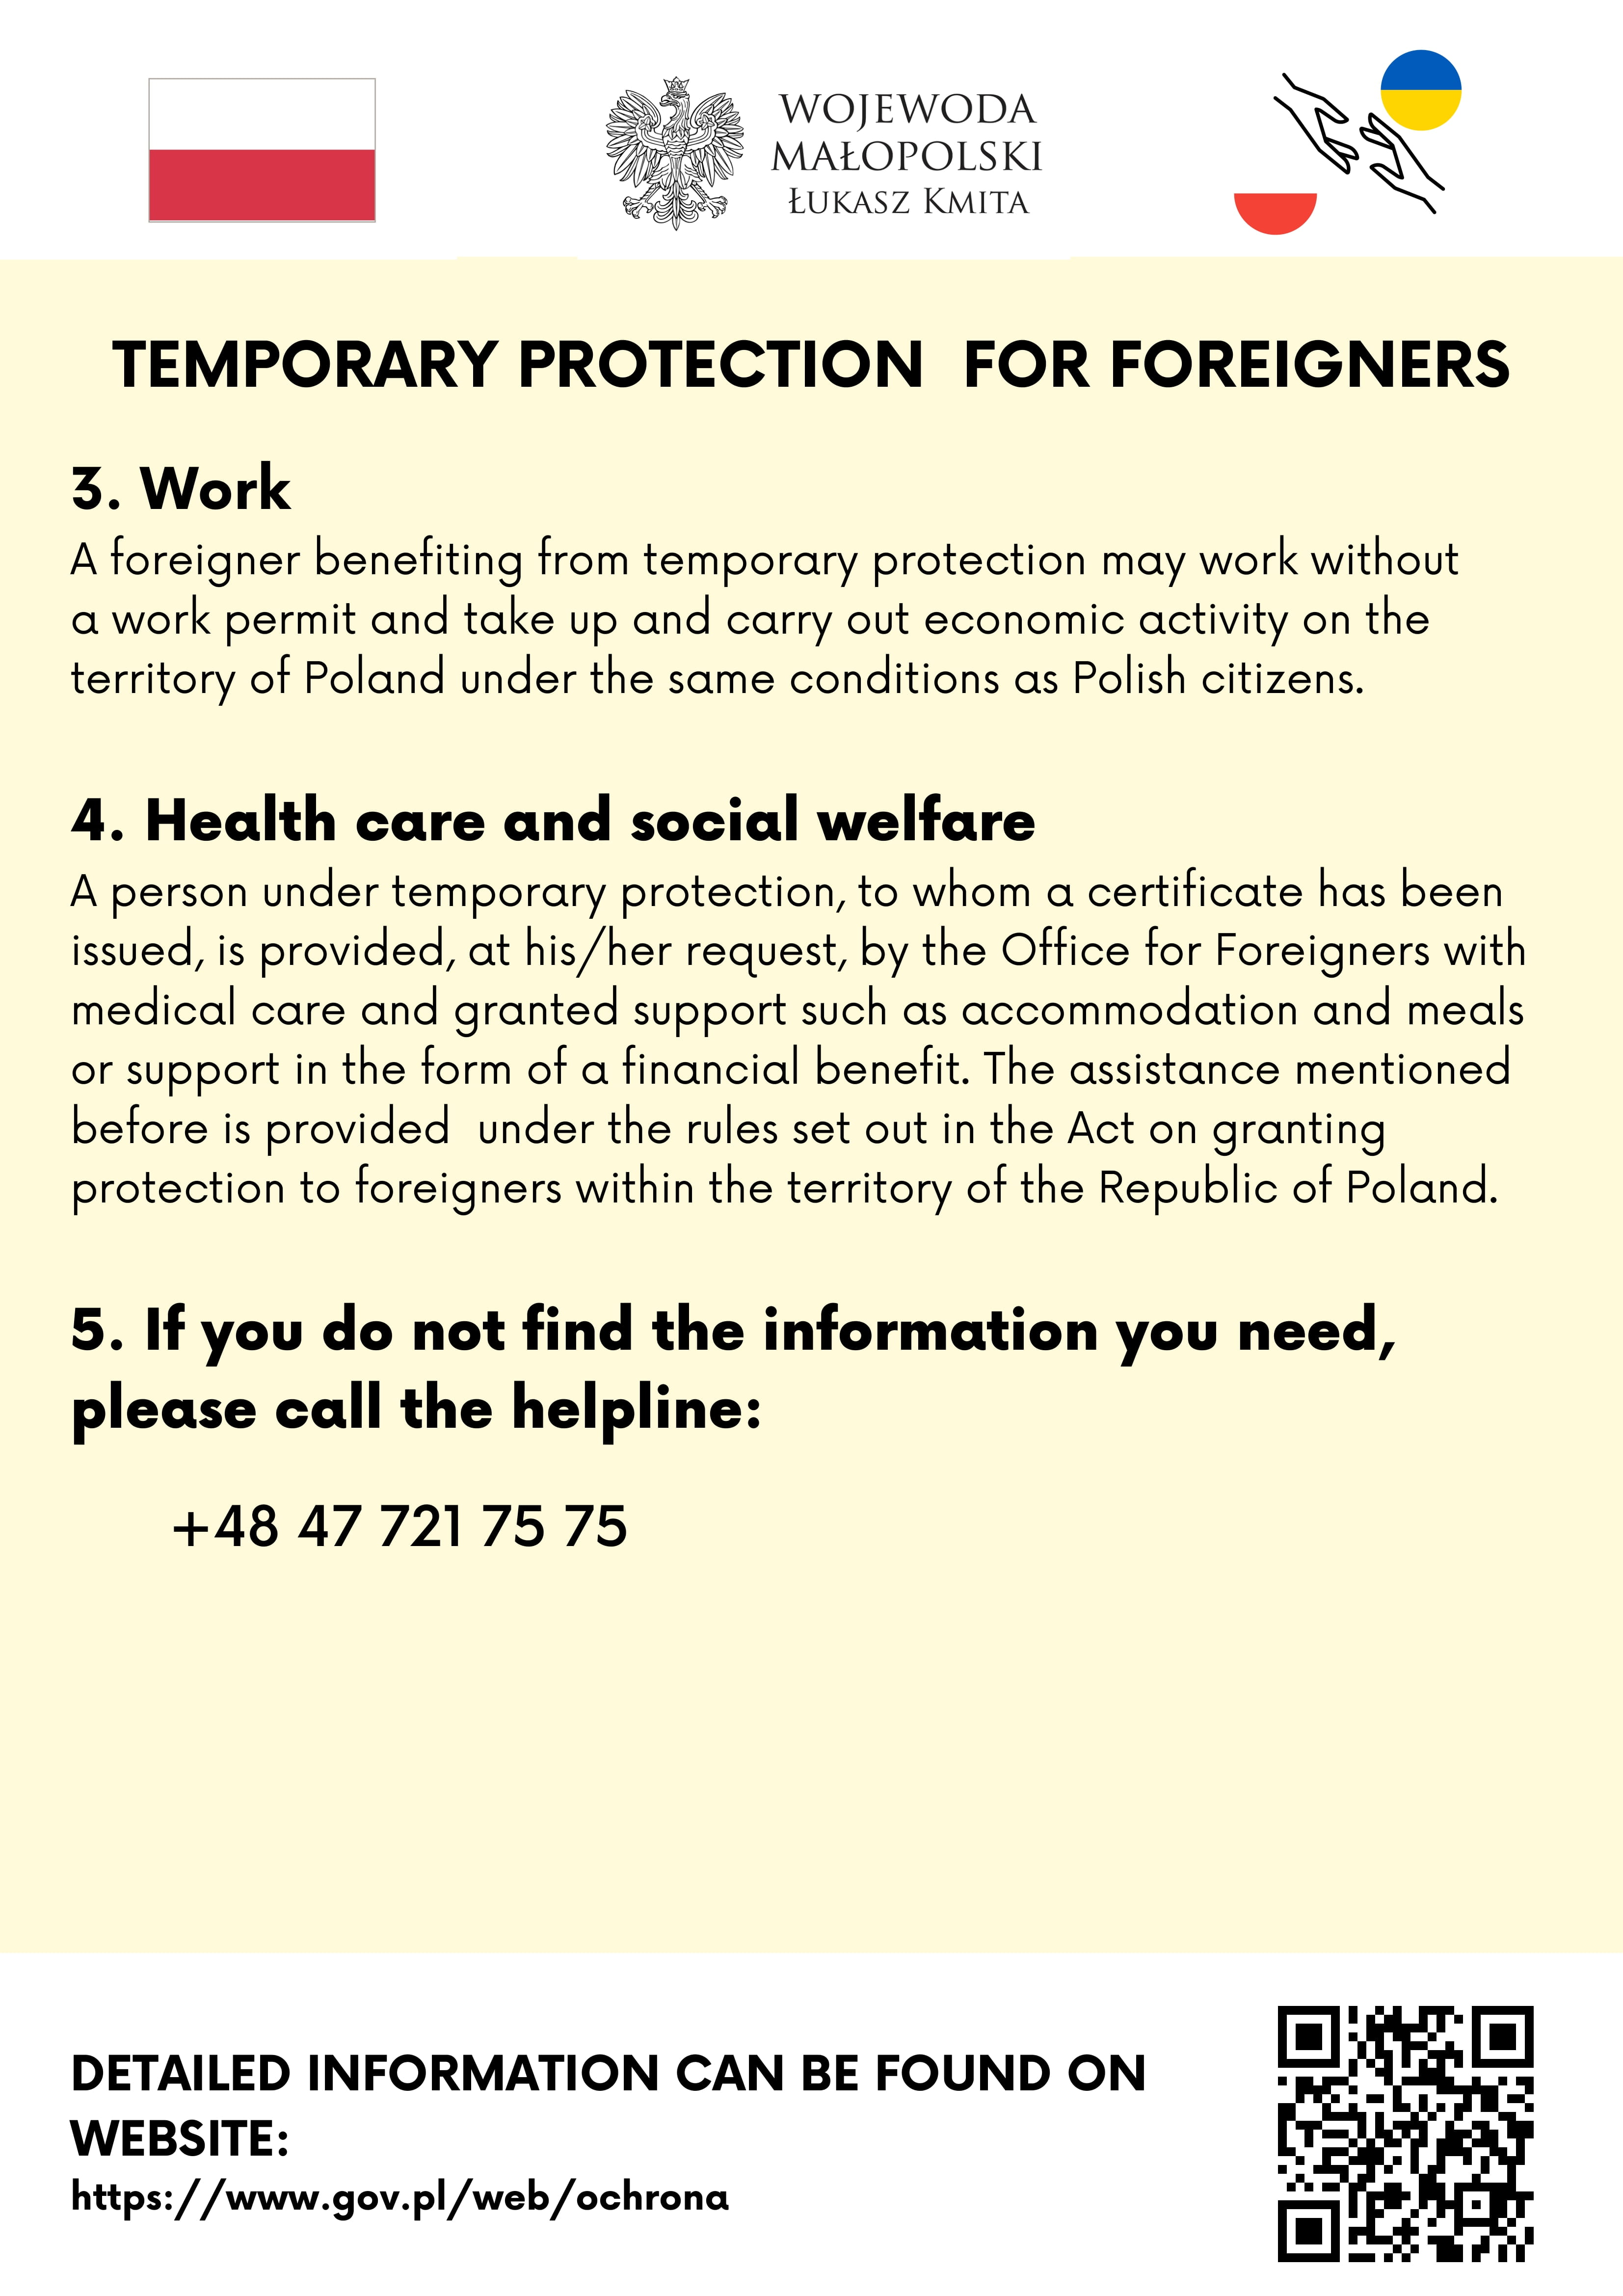 3. Work
A foreigner benefiting from temporary protection may work without a work permit and take up and carry out economic activity on the territory of Poland under the same conditions as Polish citizens.
4. Health care and social welfare
A person under temporary protection, to whom a certificate has been issued, is provided, at his/her request, by the Office for Foreigners with medical care and granted support such as accommodation and meals or support in the form of a financial benefit. The assistance mentioned before is provided  under the rules set out in the Act on granting protection to foreigners within the territory of the Republic of Poland.
5. If you do not find the information you need, please call the helpline: +48 47 721 75 75

Detailed information can be found on website: https://www.gov.pl/web/ochrona 